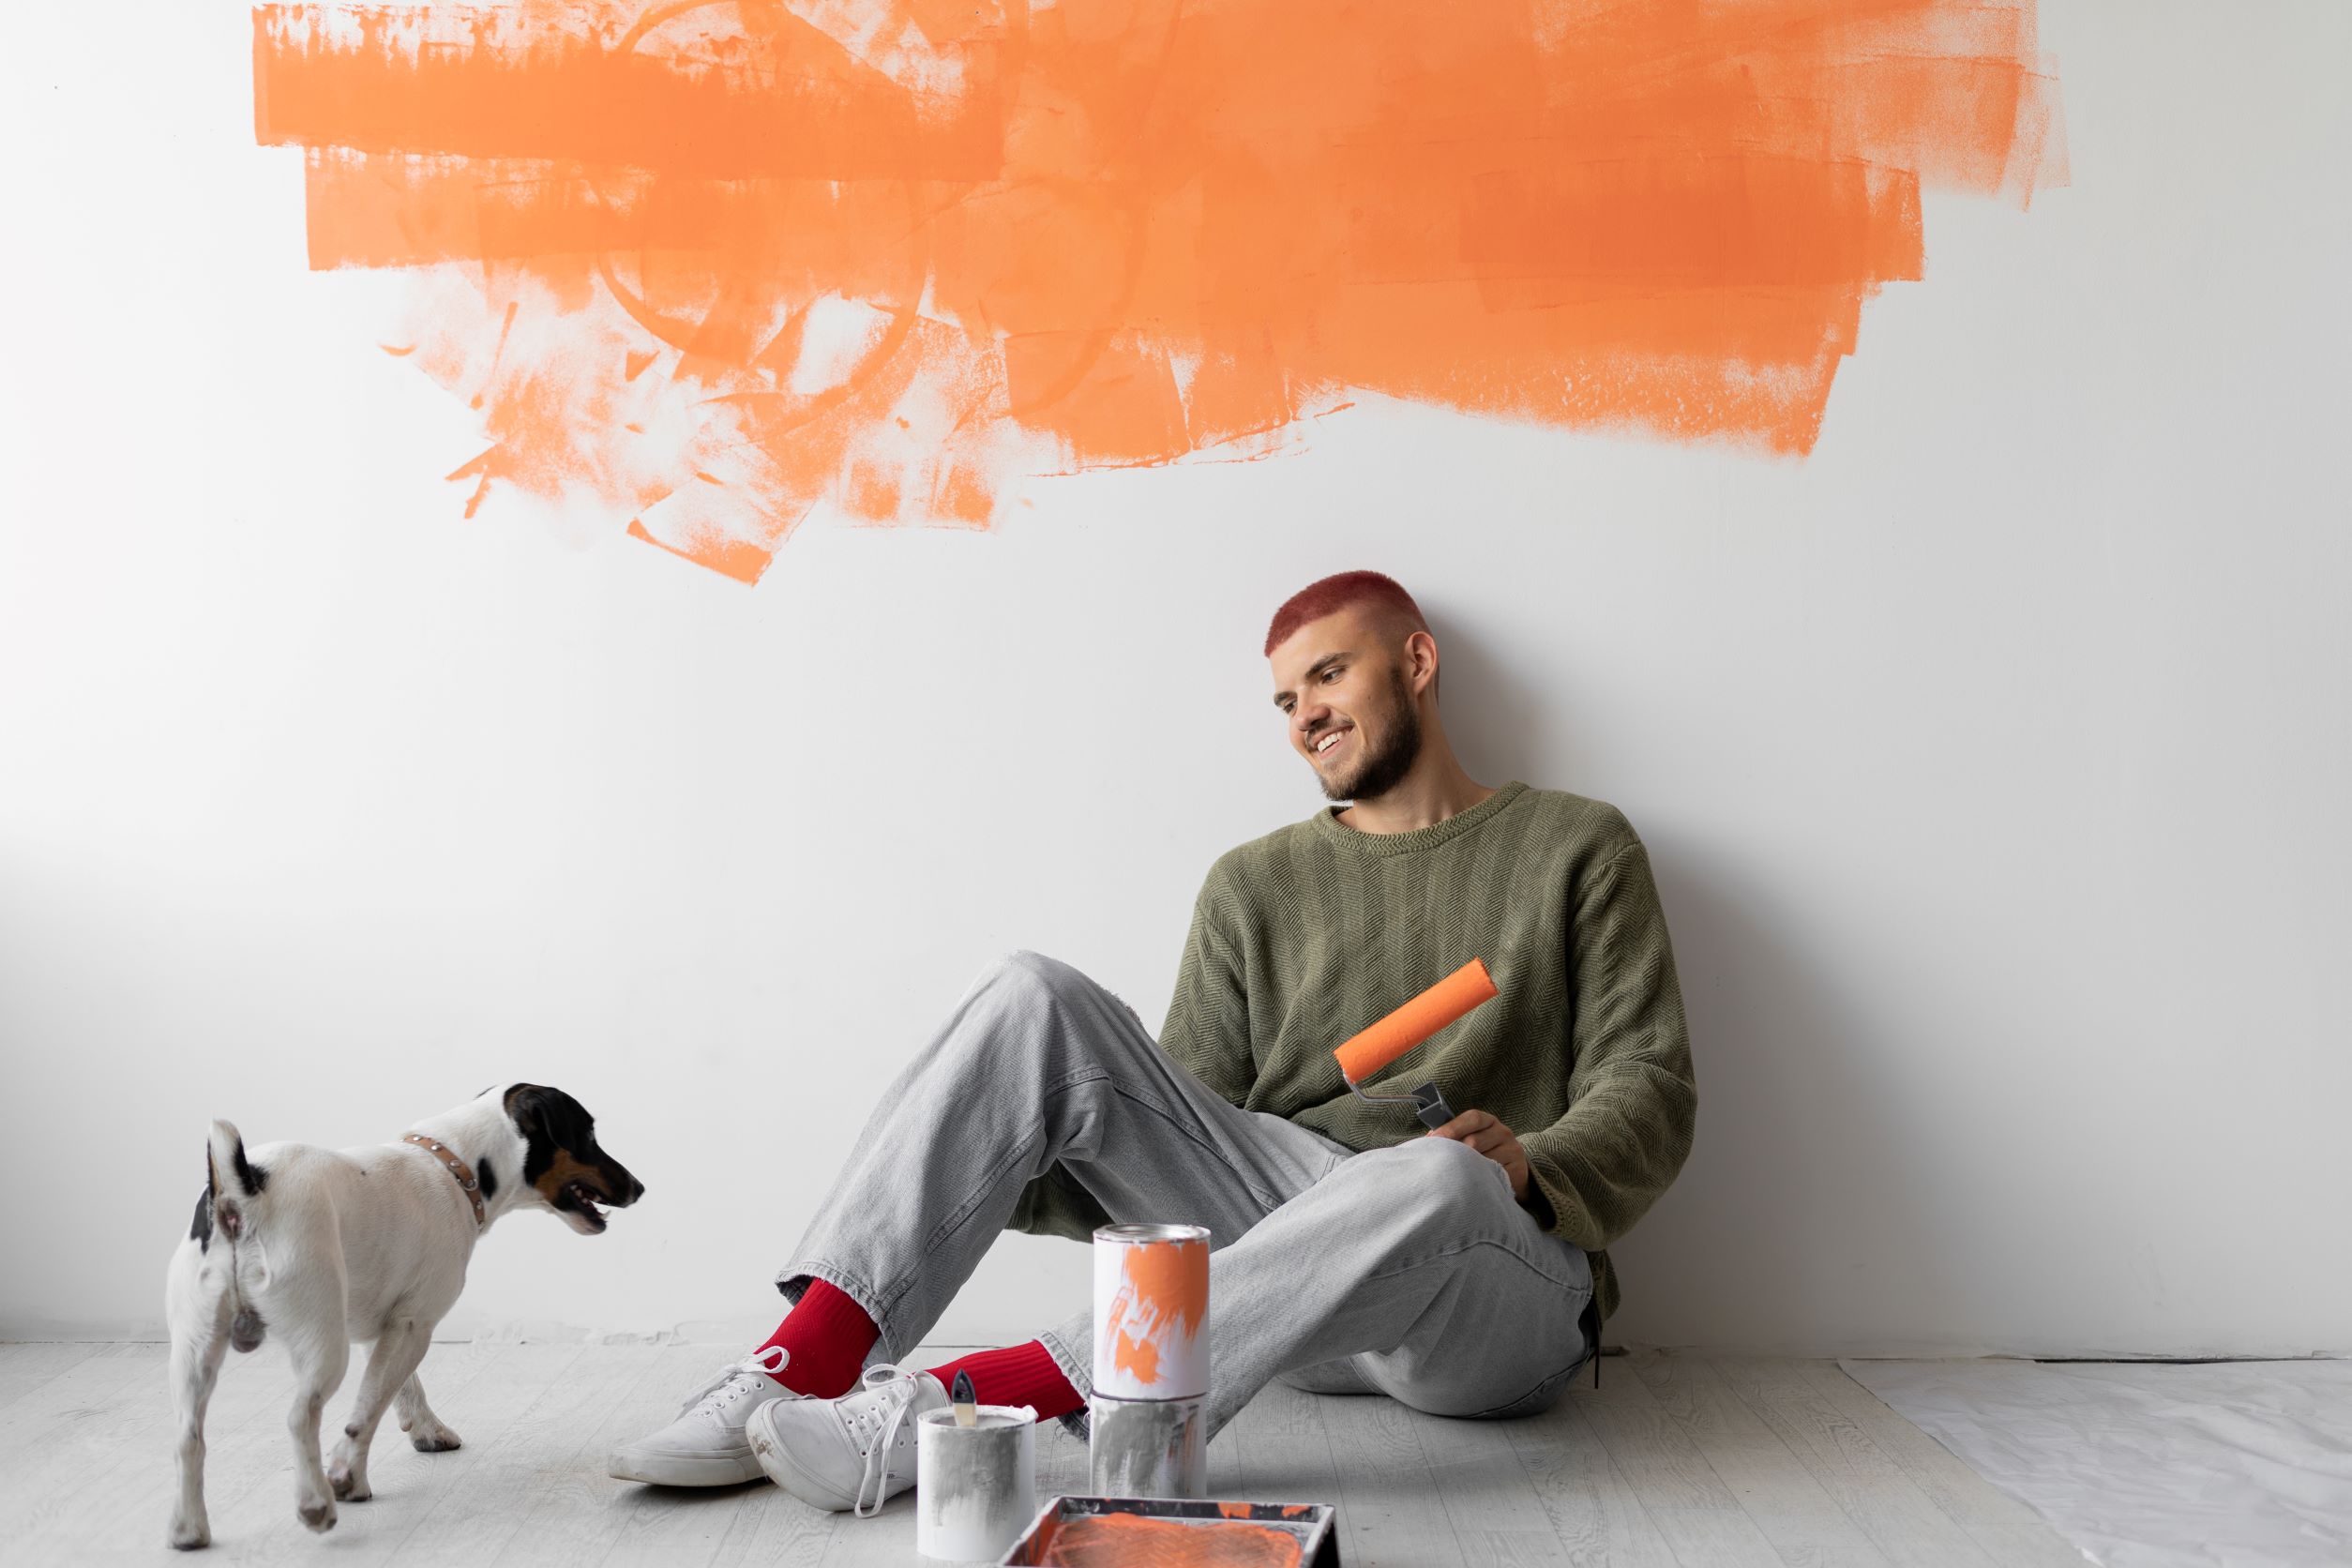 Man seating down holding a paint roller and looking at his dog